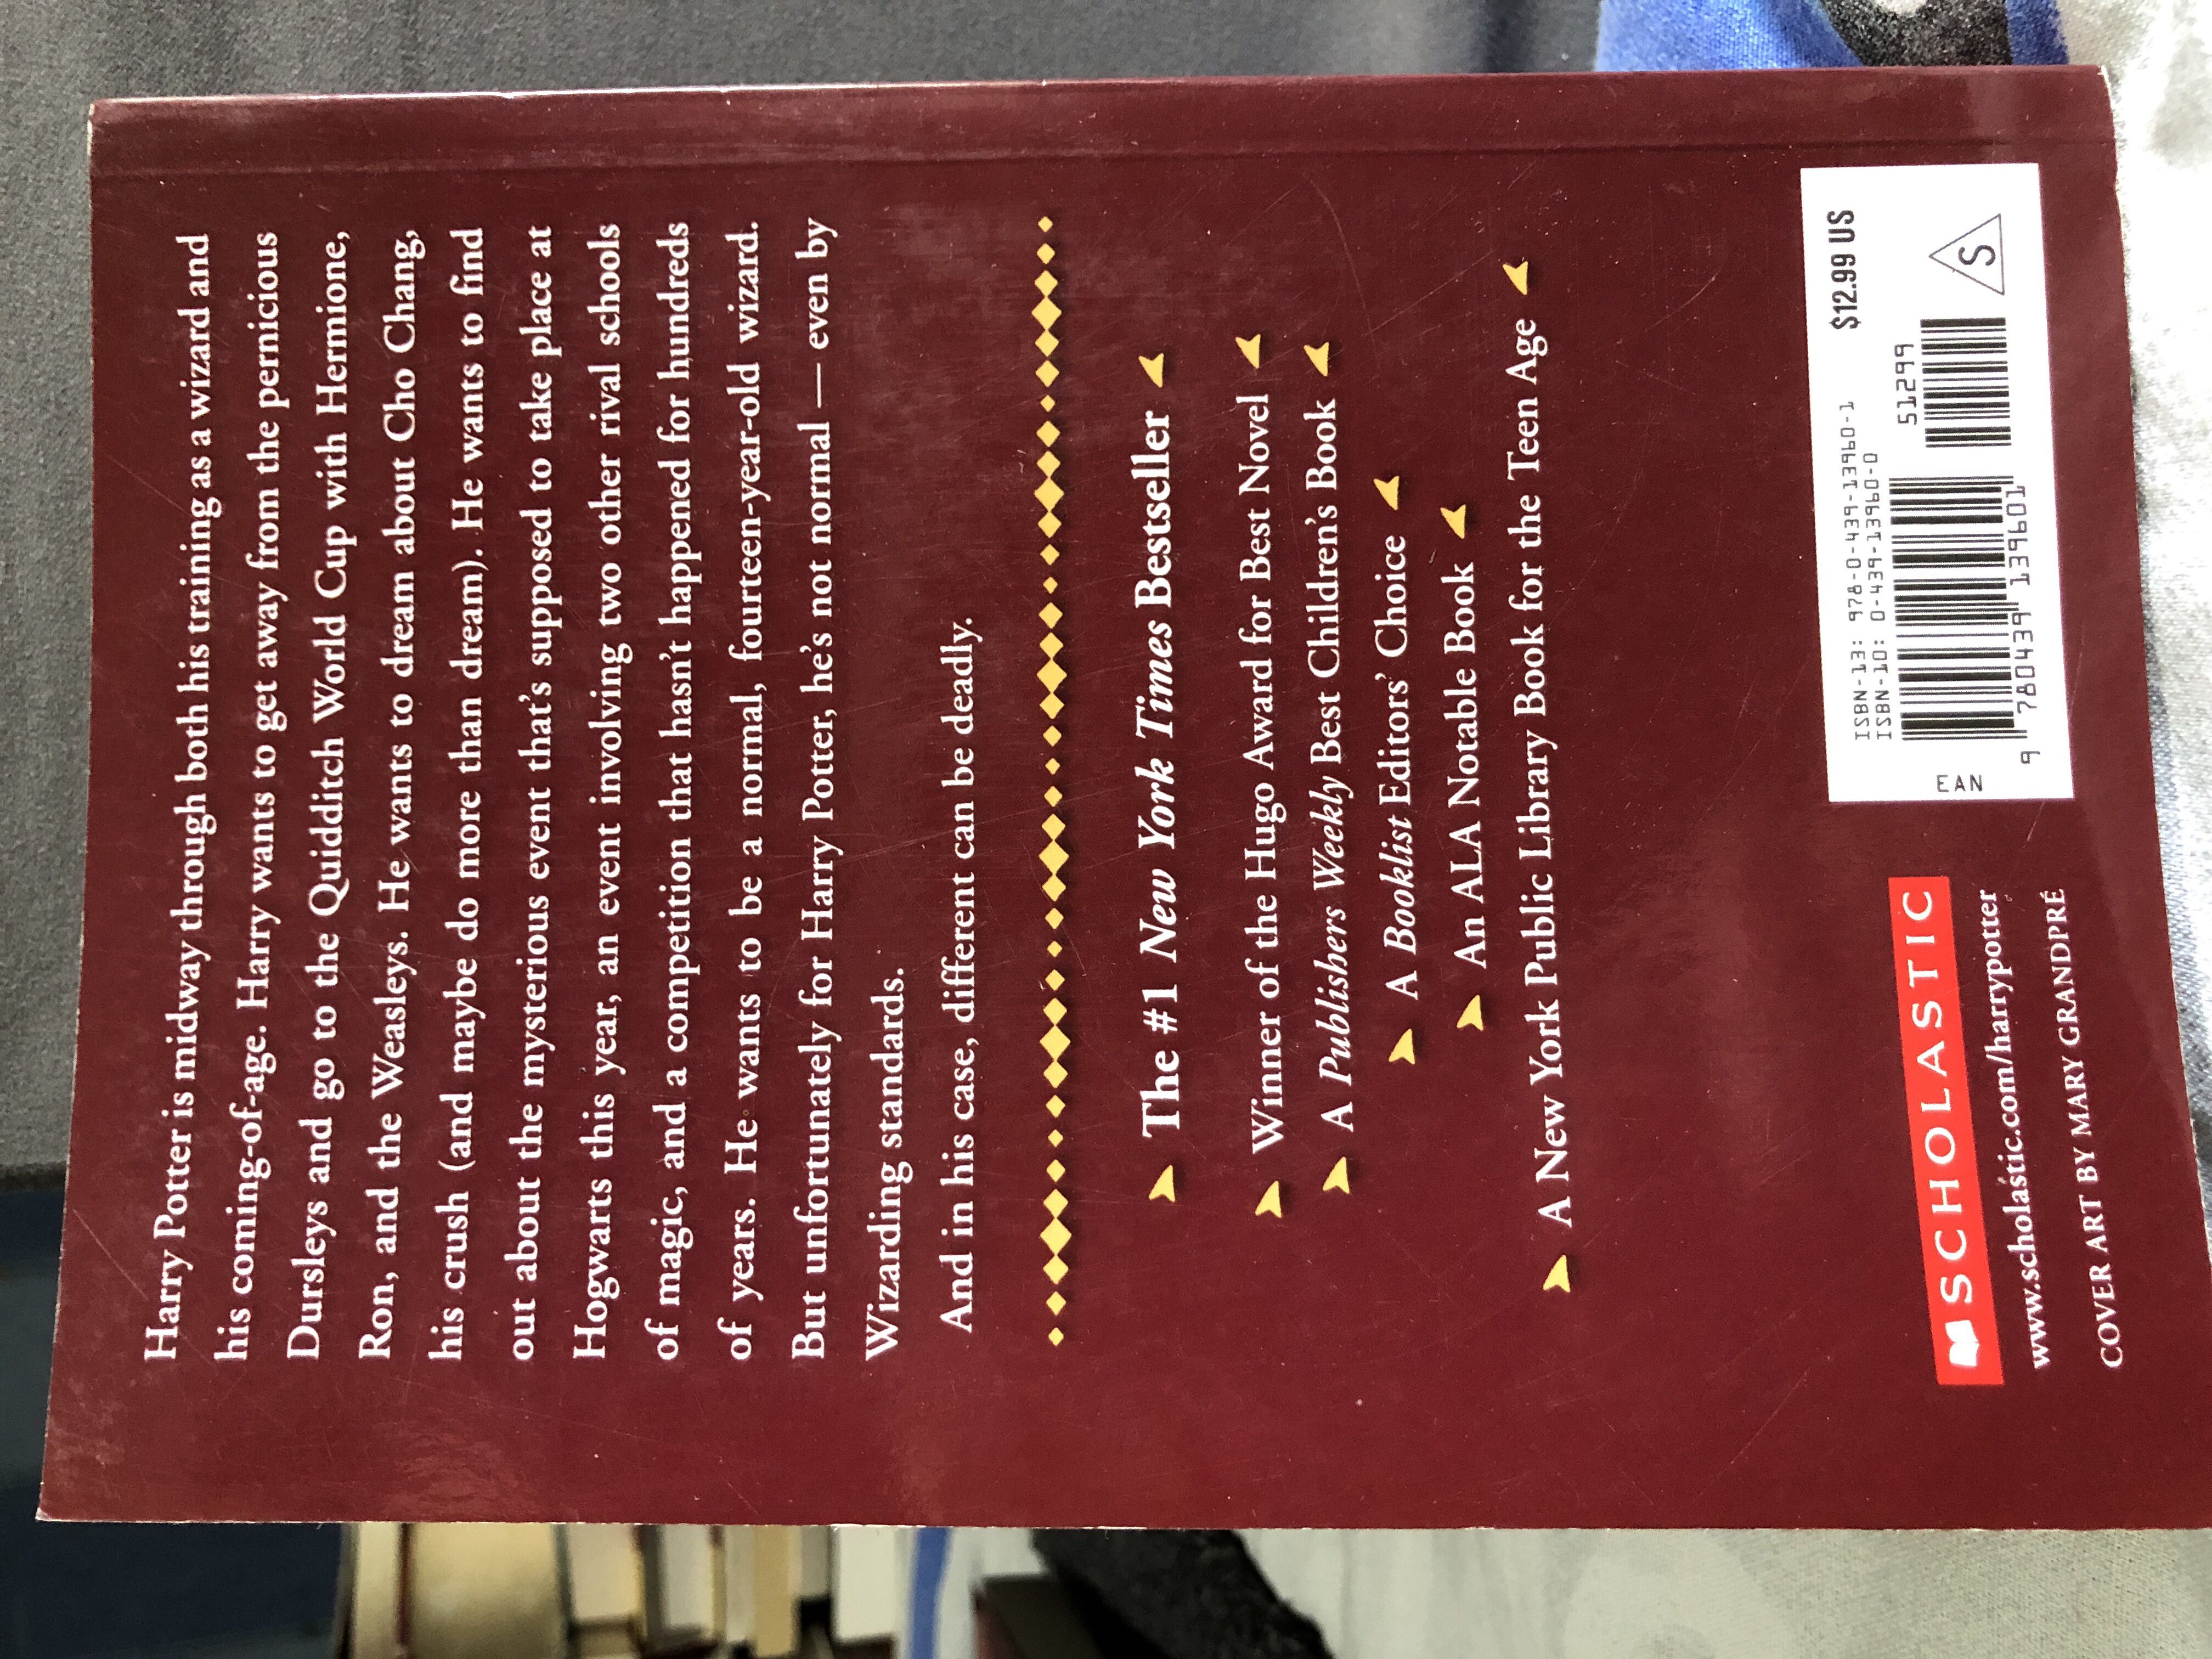 04-Harry Potter and the Goblet of Fire - J. K. Rowling (Scholastic Inc. - Paperback) book collectible [Barcode 9780439139601] - Main Image 3